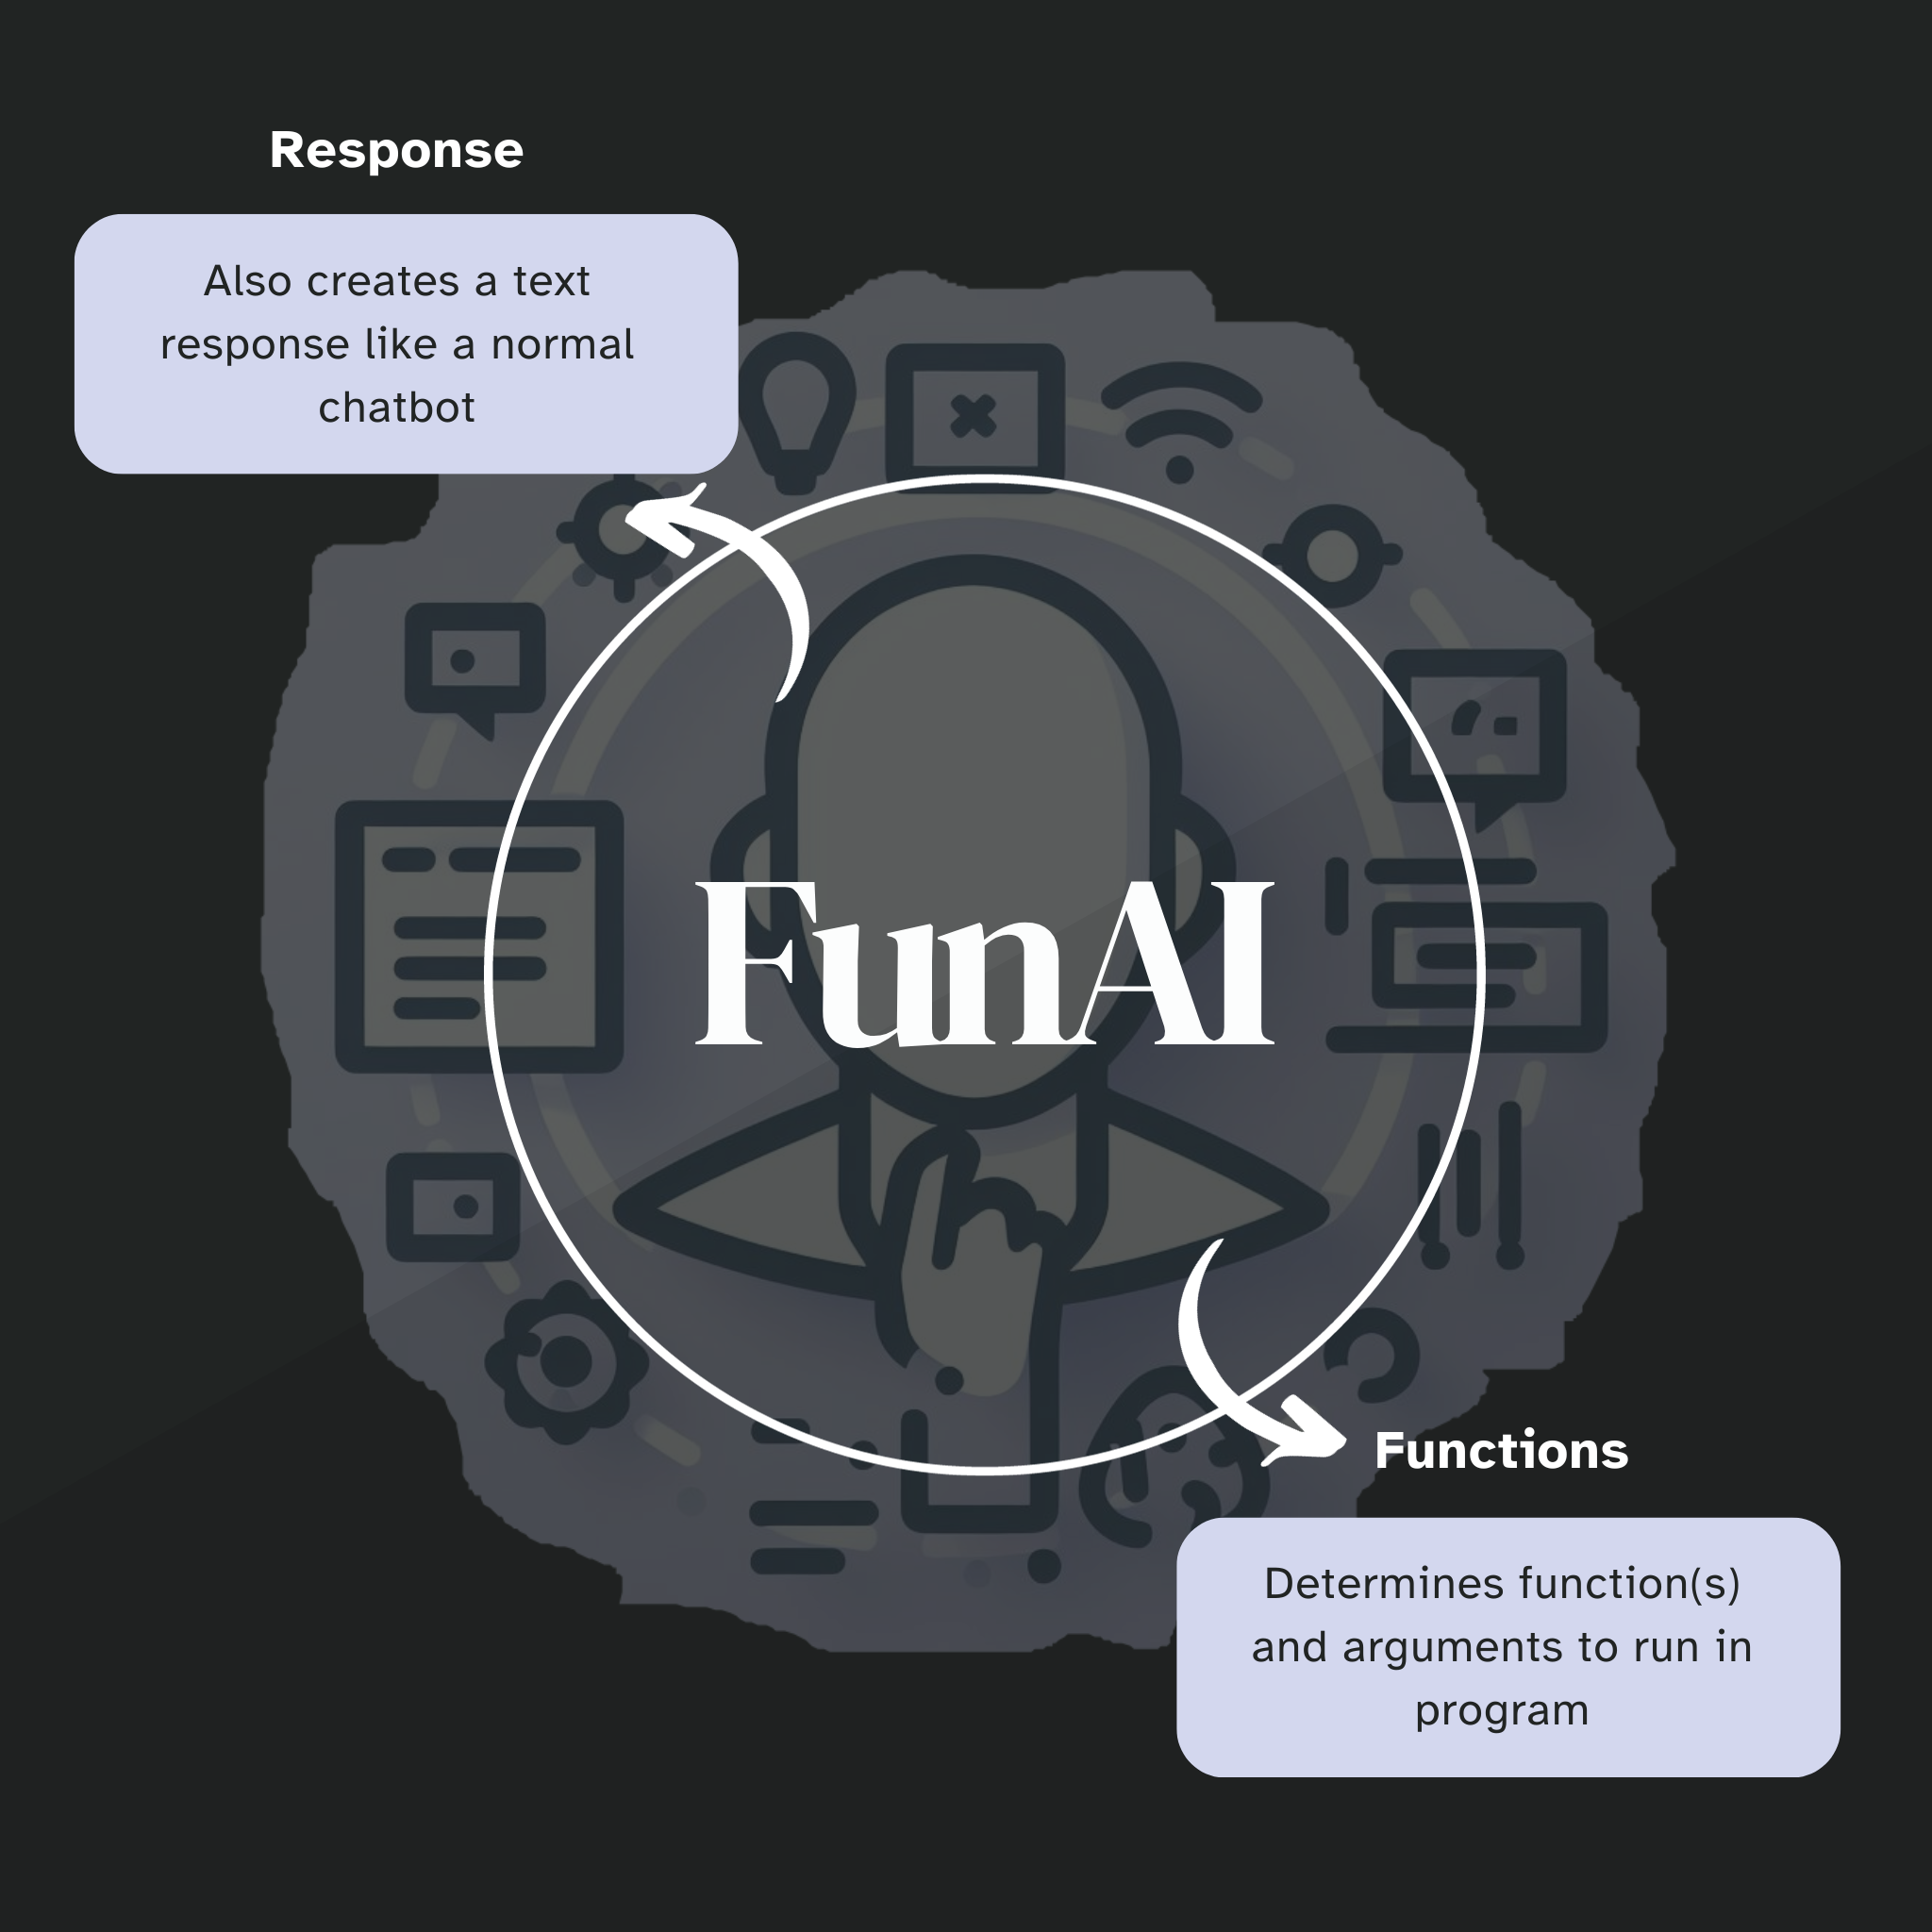 An image showing a graphic for the Functionality on FunAI, the project. It has arrows showing that the program can give AI responses and also run functions from the same prompt request.